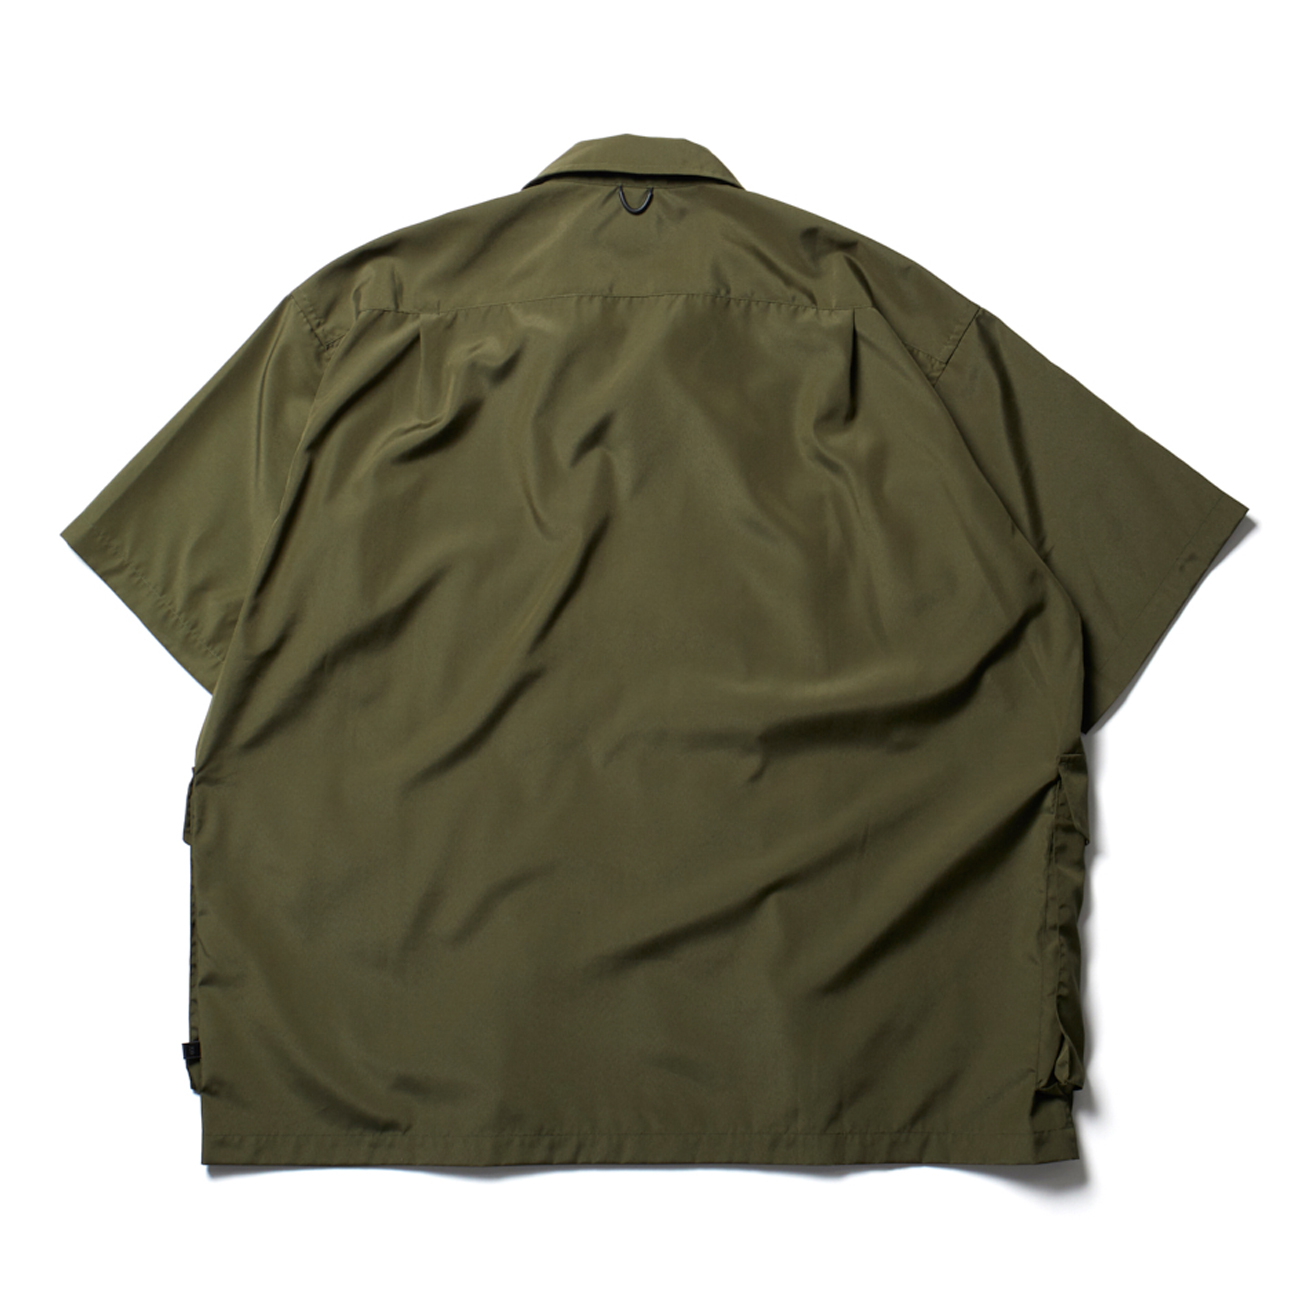 DAIWA PIER39 / ダイワピア39 | Tech French Mil Field Shirts S/S - Black | 通販 -  正規取扱店 | COLLECT STORE / コレクトストア